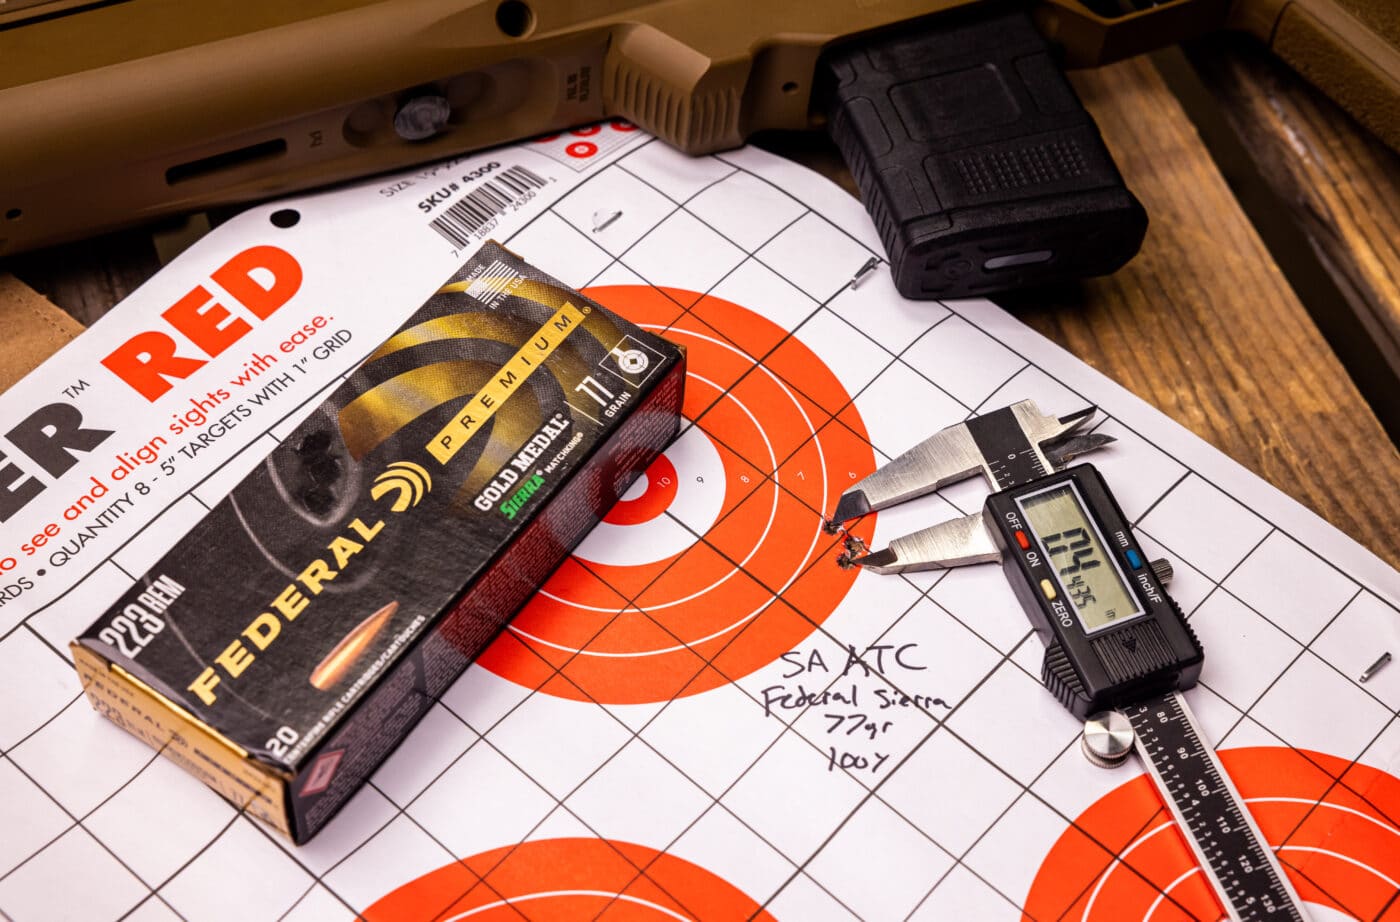 Target measuring tool next to ammo and rifle